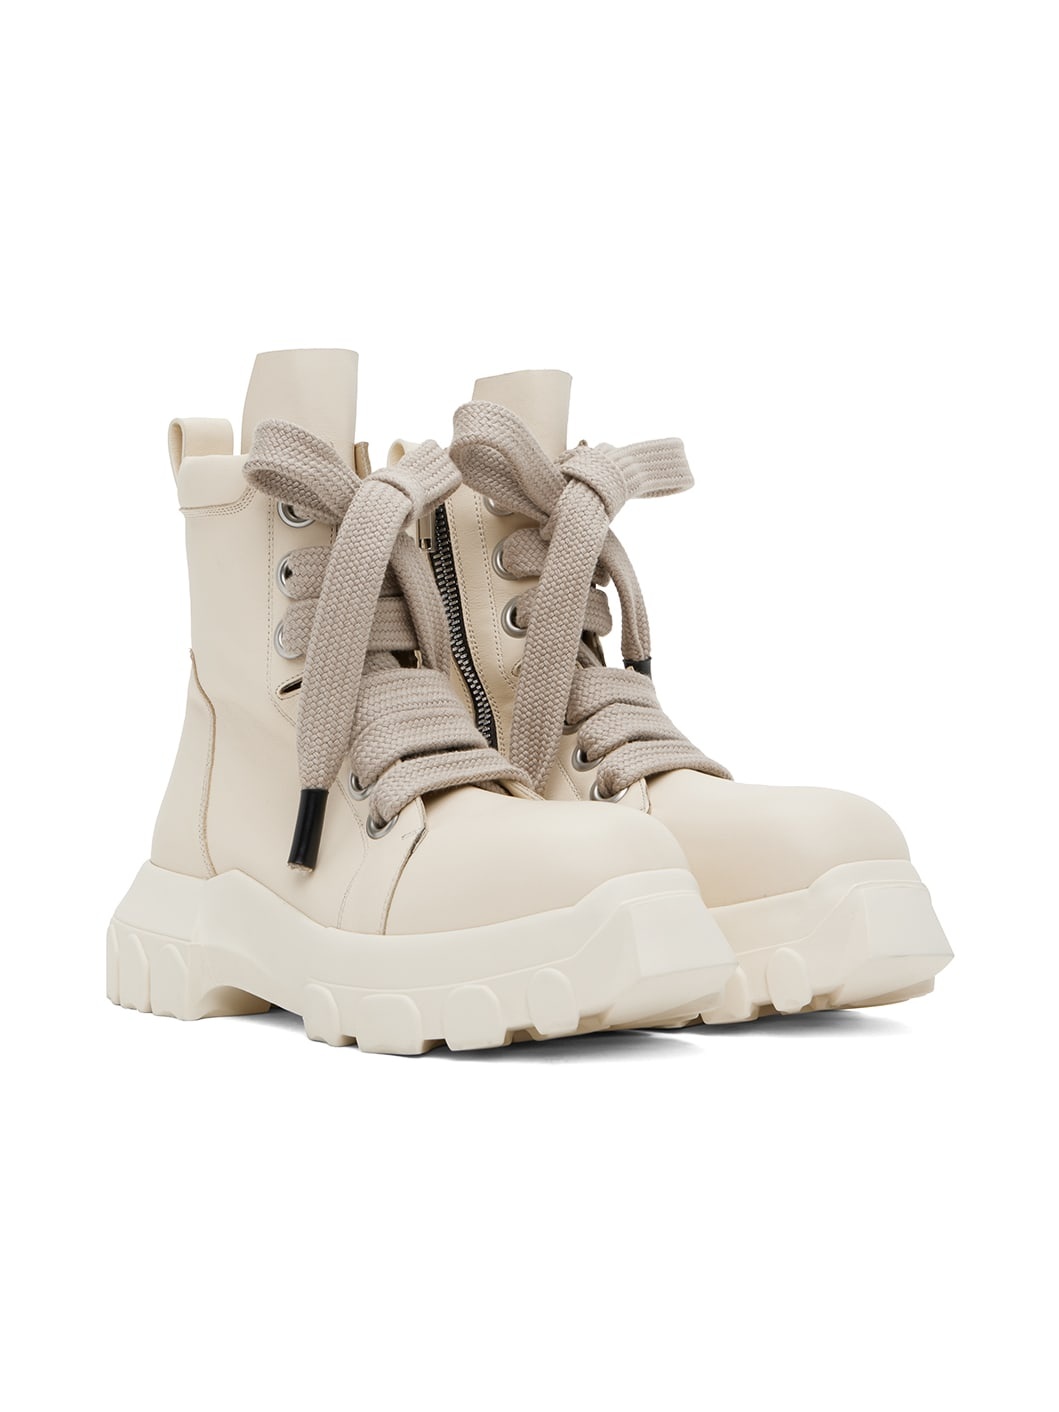 Off-White Jumbo Laced Bozo Tractor Boots - 4